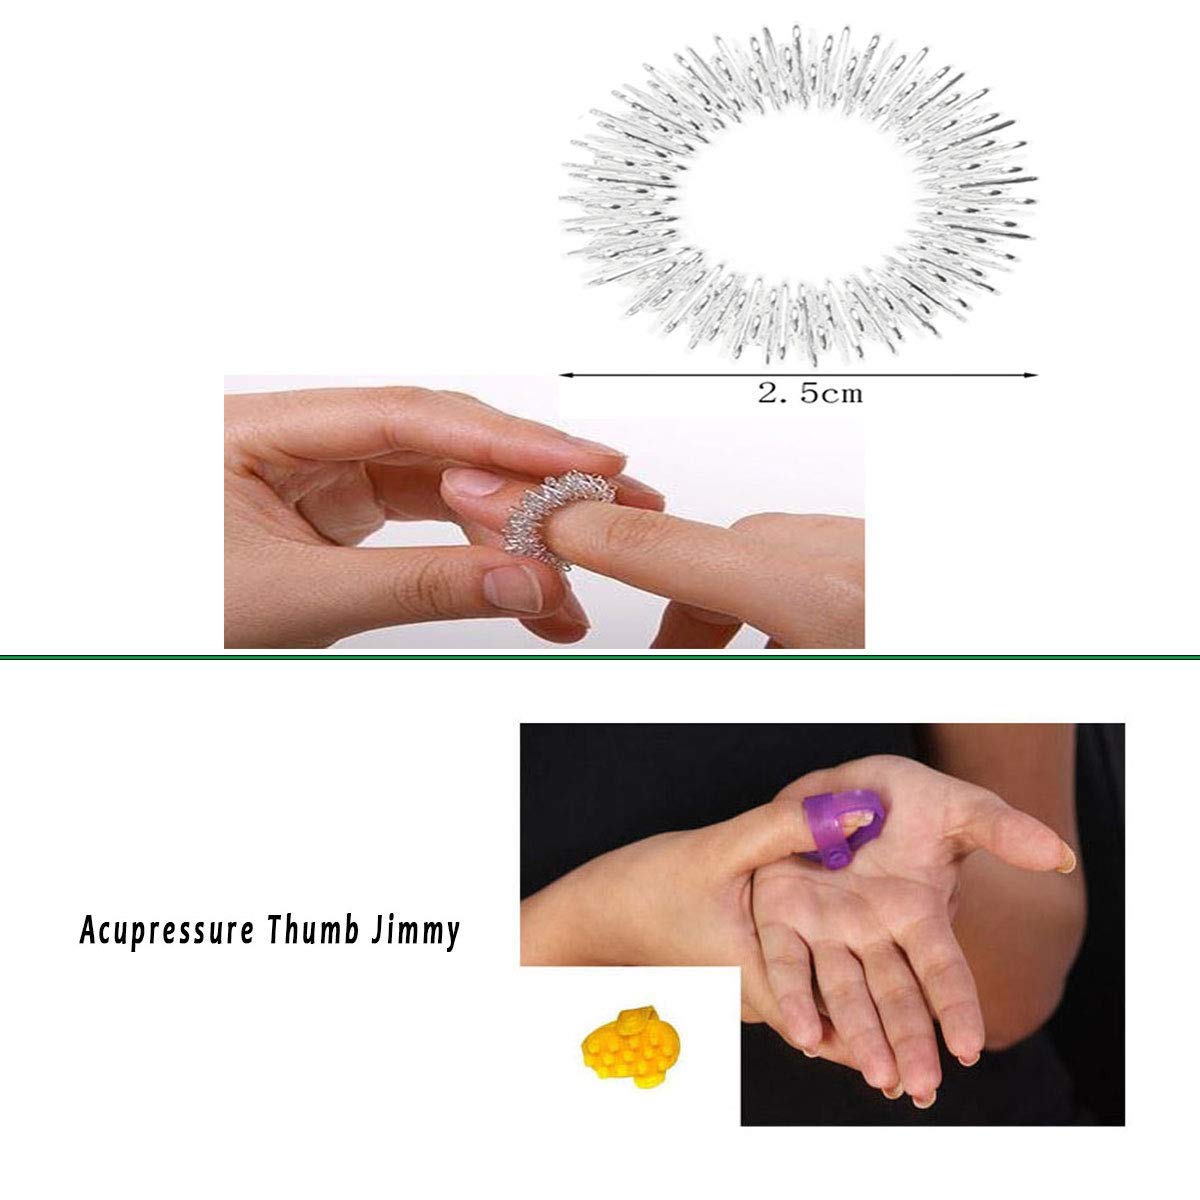 Acupressure Ring Review 2019 | The Strategist